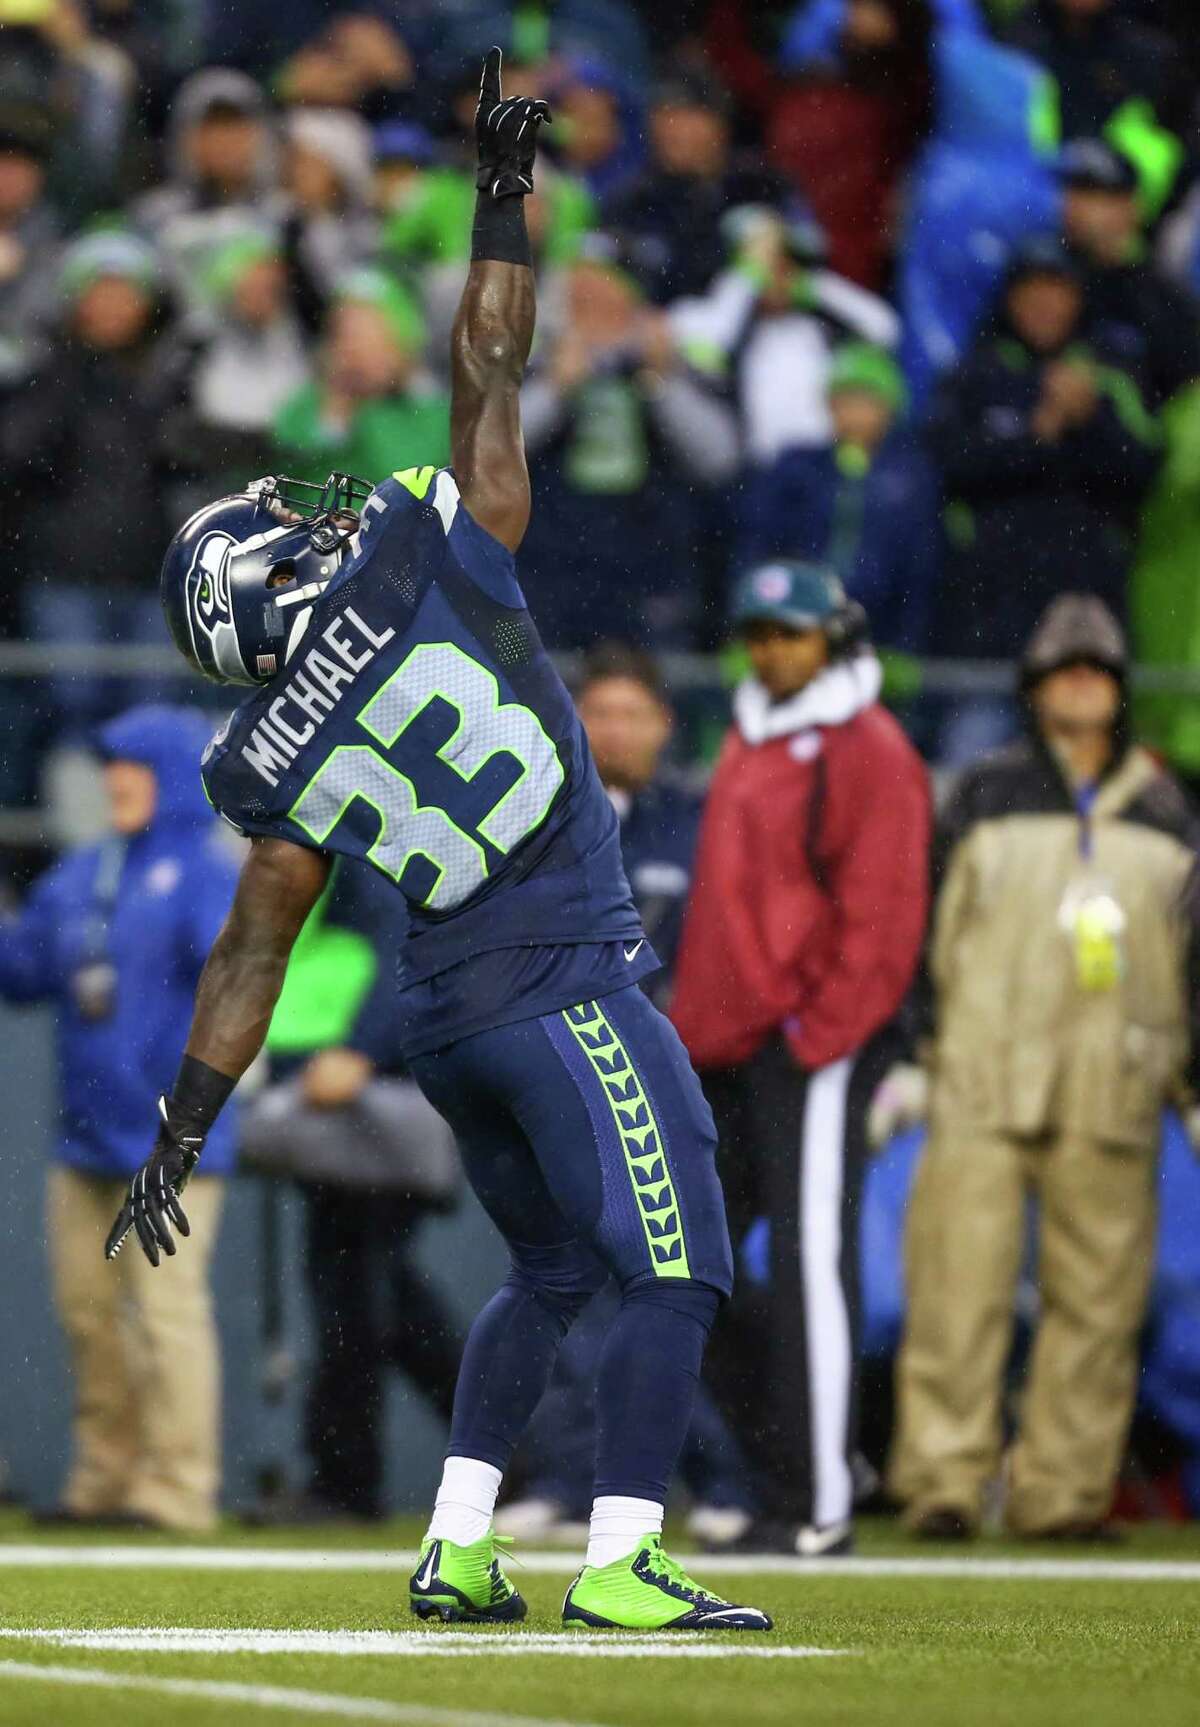 Seattle Seahawks player Christine Michael points skyward after making a play against the New York Giants on Sunday, November 9, 2014 at CenturyLink Field in Seattle.